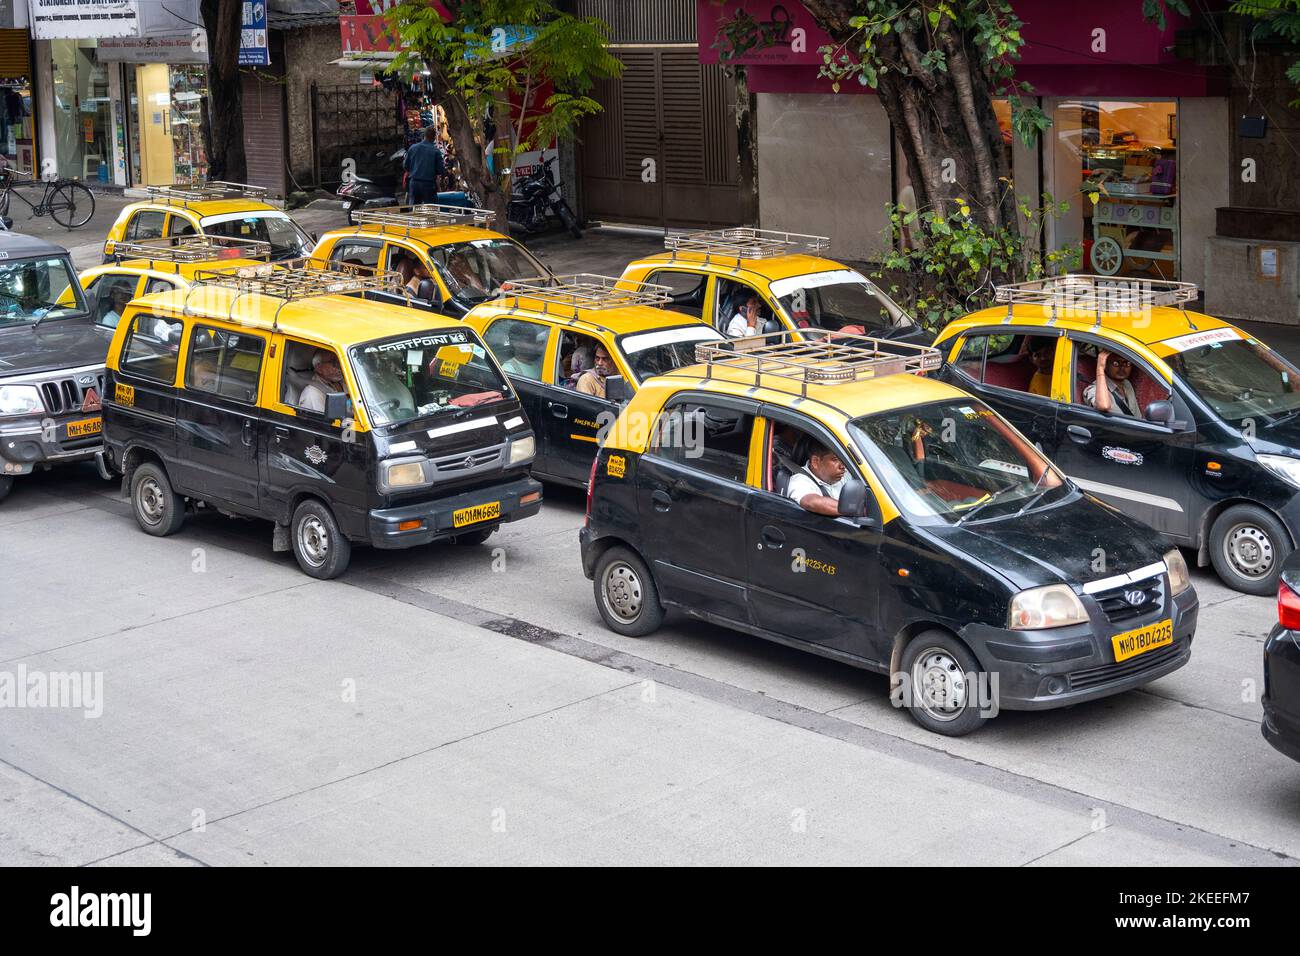 MUMBAI - SEP 20: Rows of traditional Mumbai yellow and black cabs, taxi in a city street on September 20. 2022 in India Stock Photo